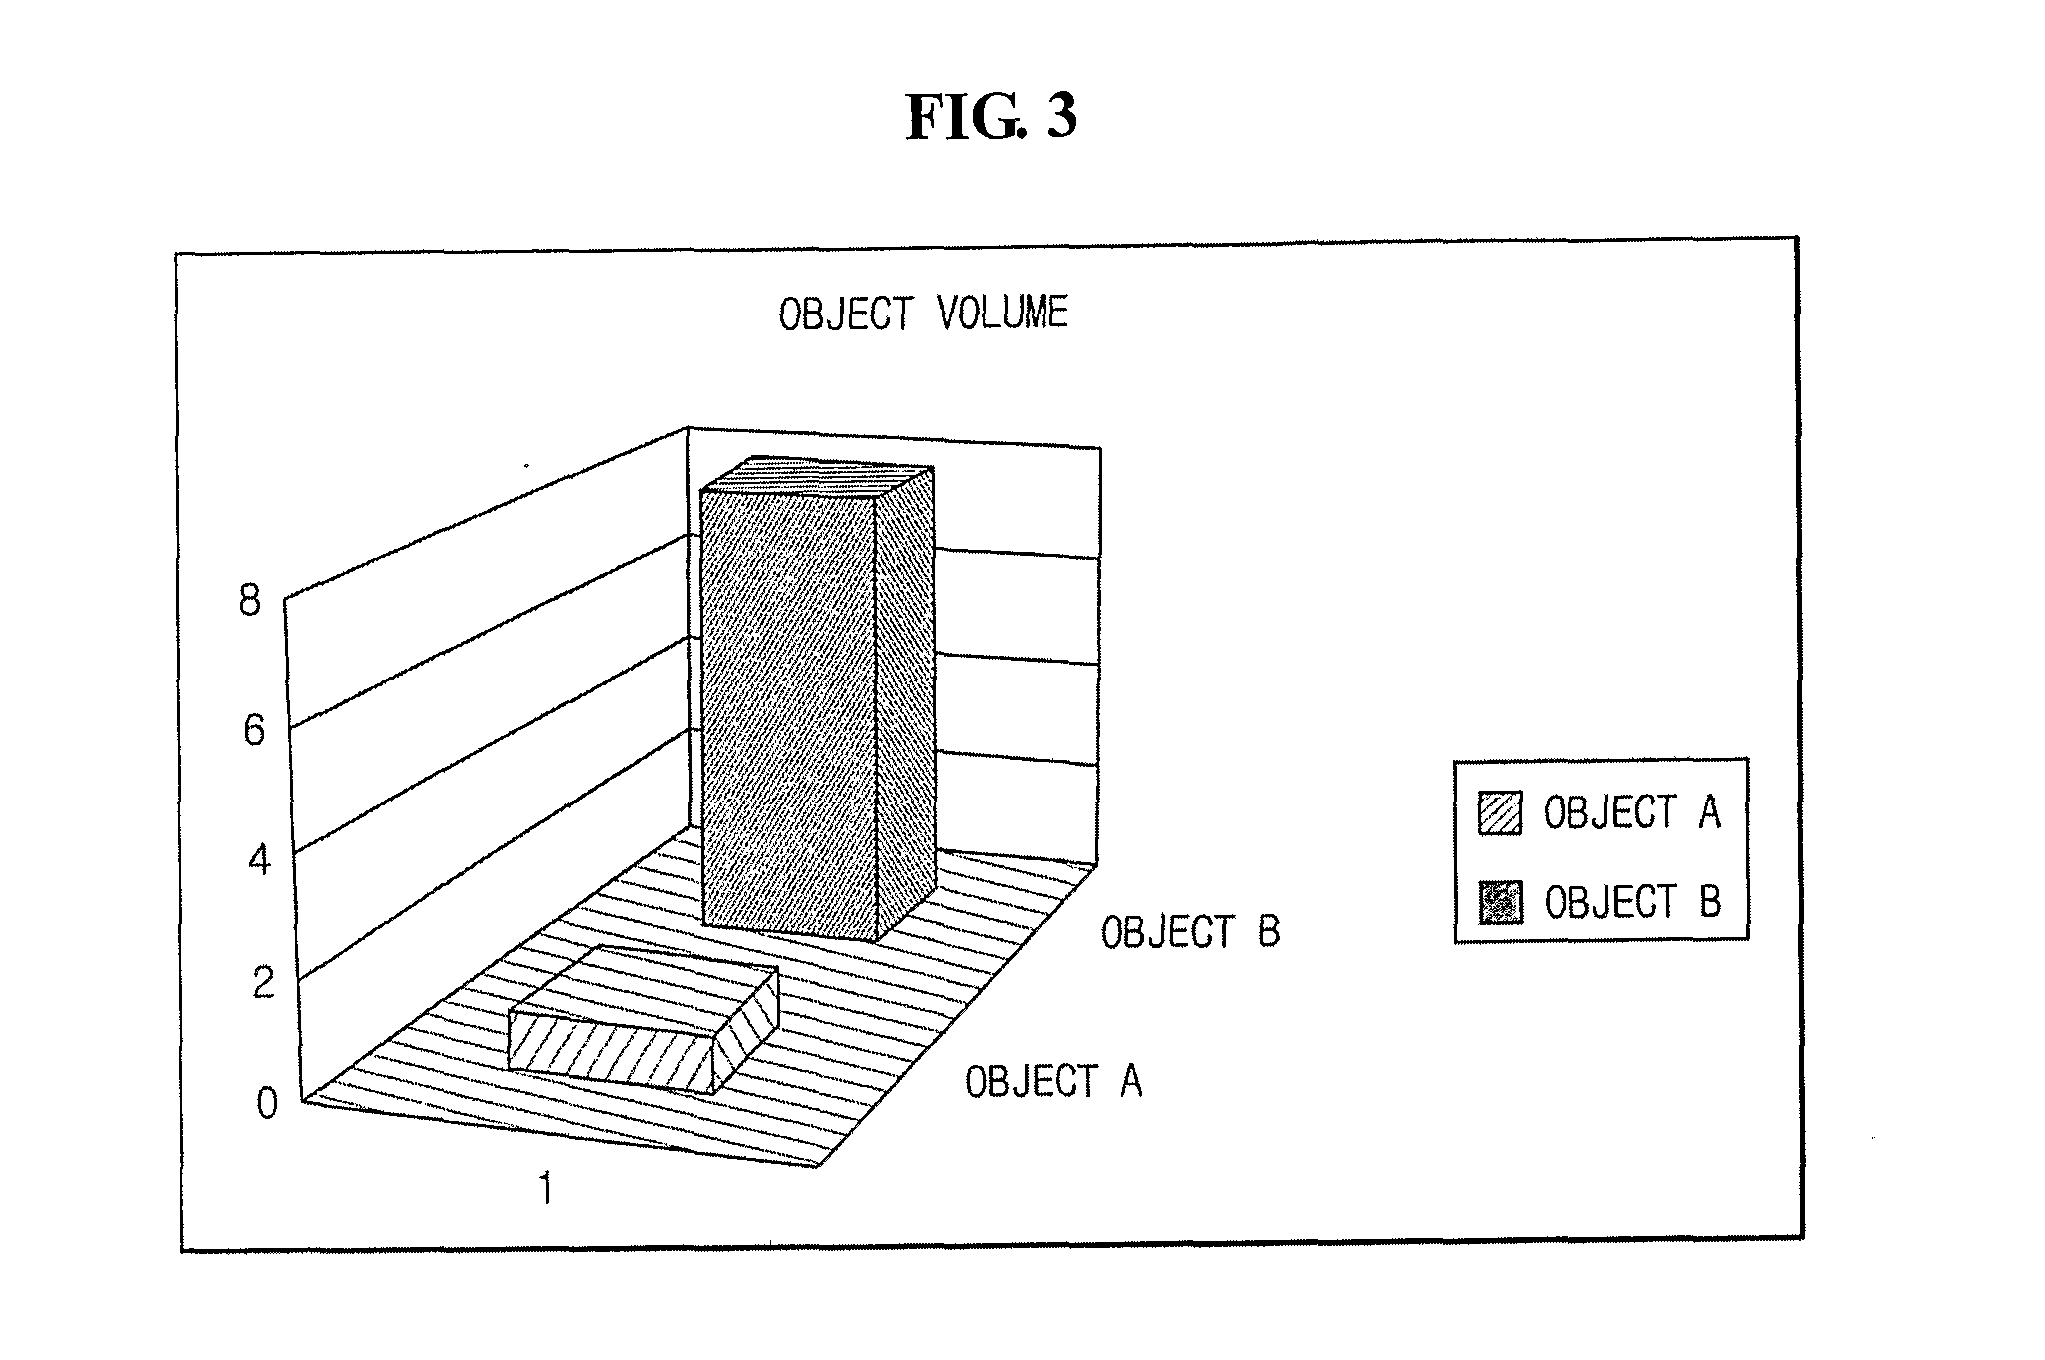 Image Resource Loading System and Method Which Carries Out Loading of Object for Renewal of Game Screen